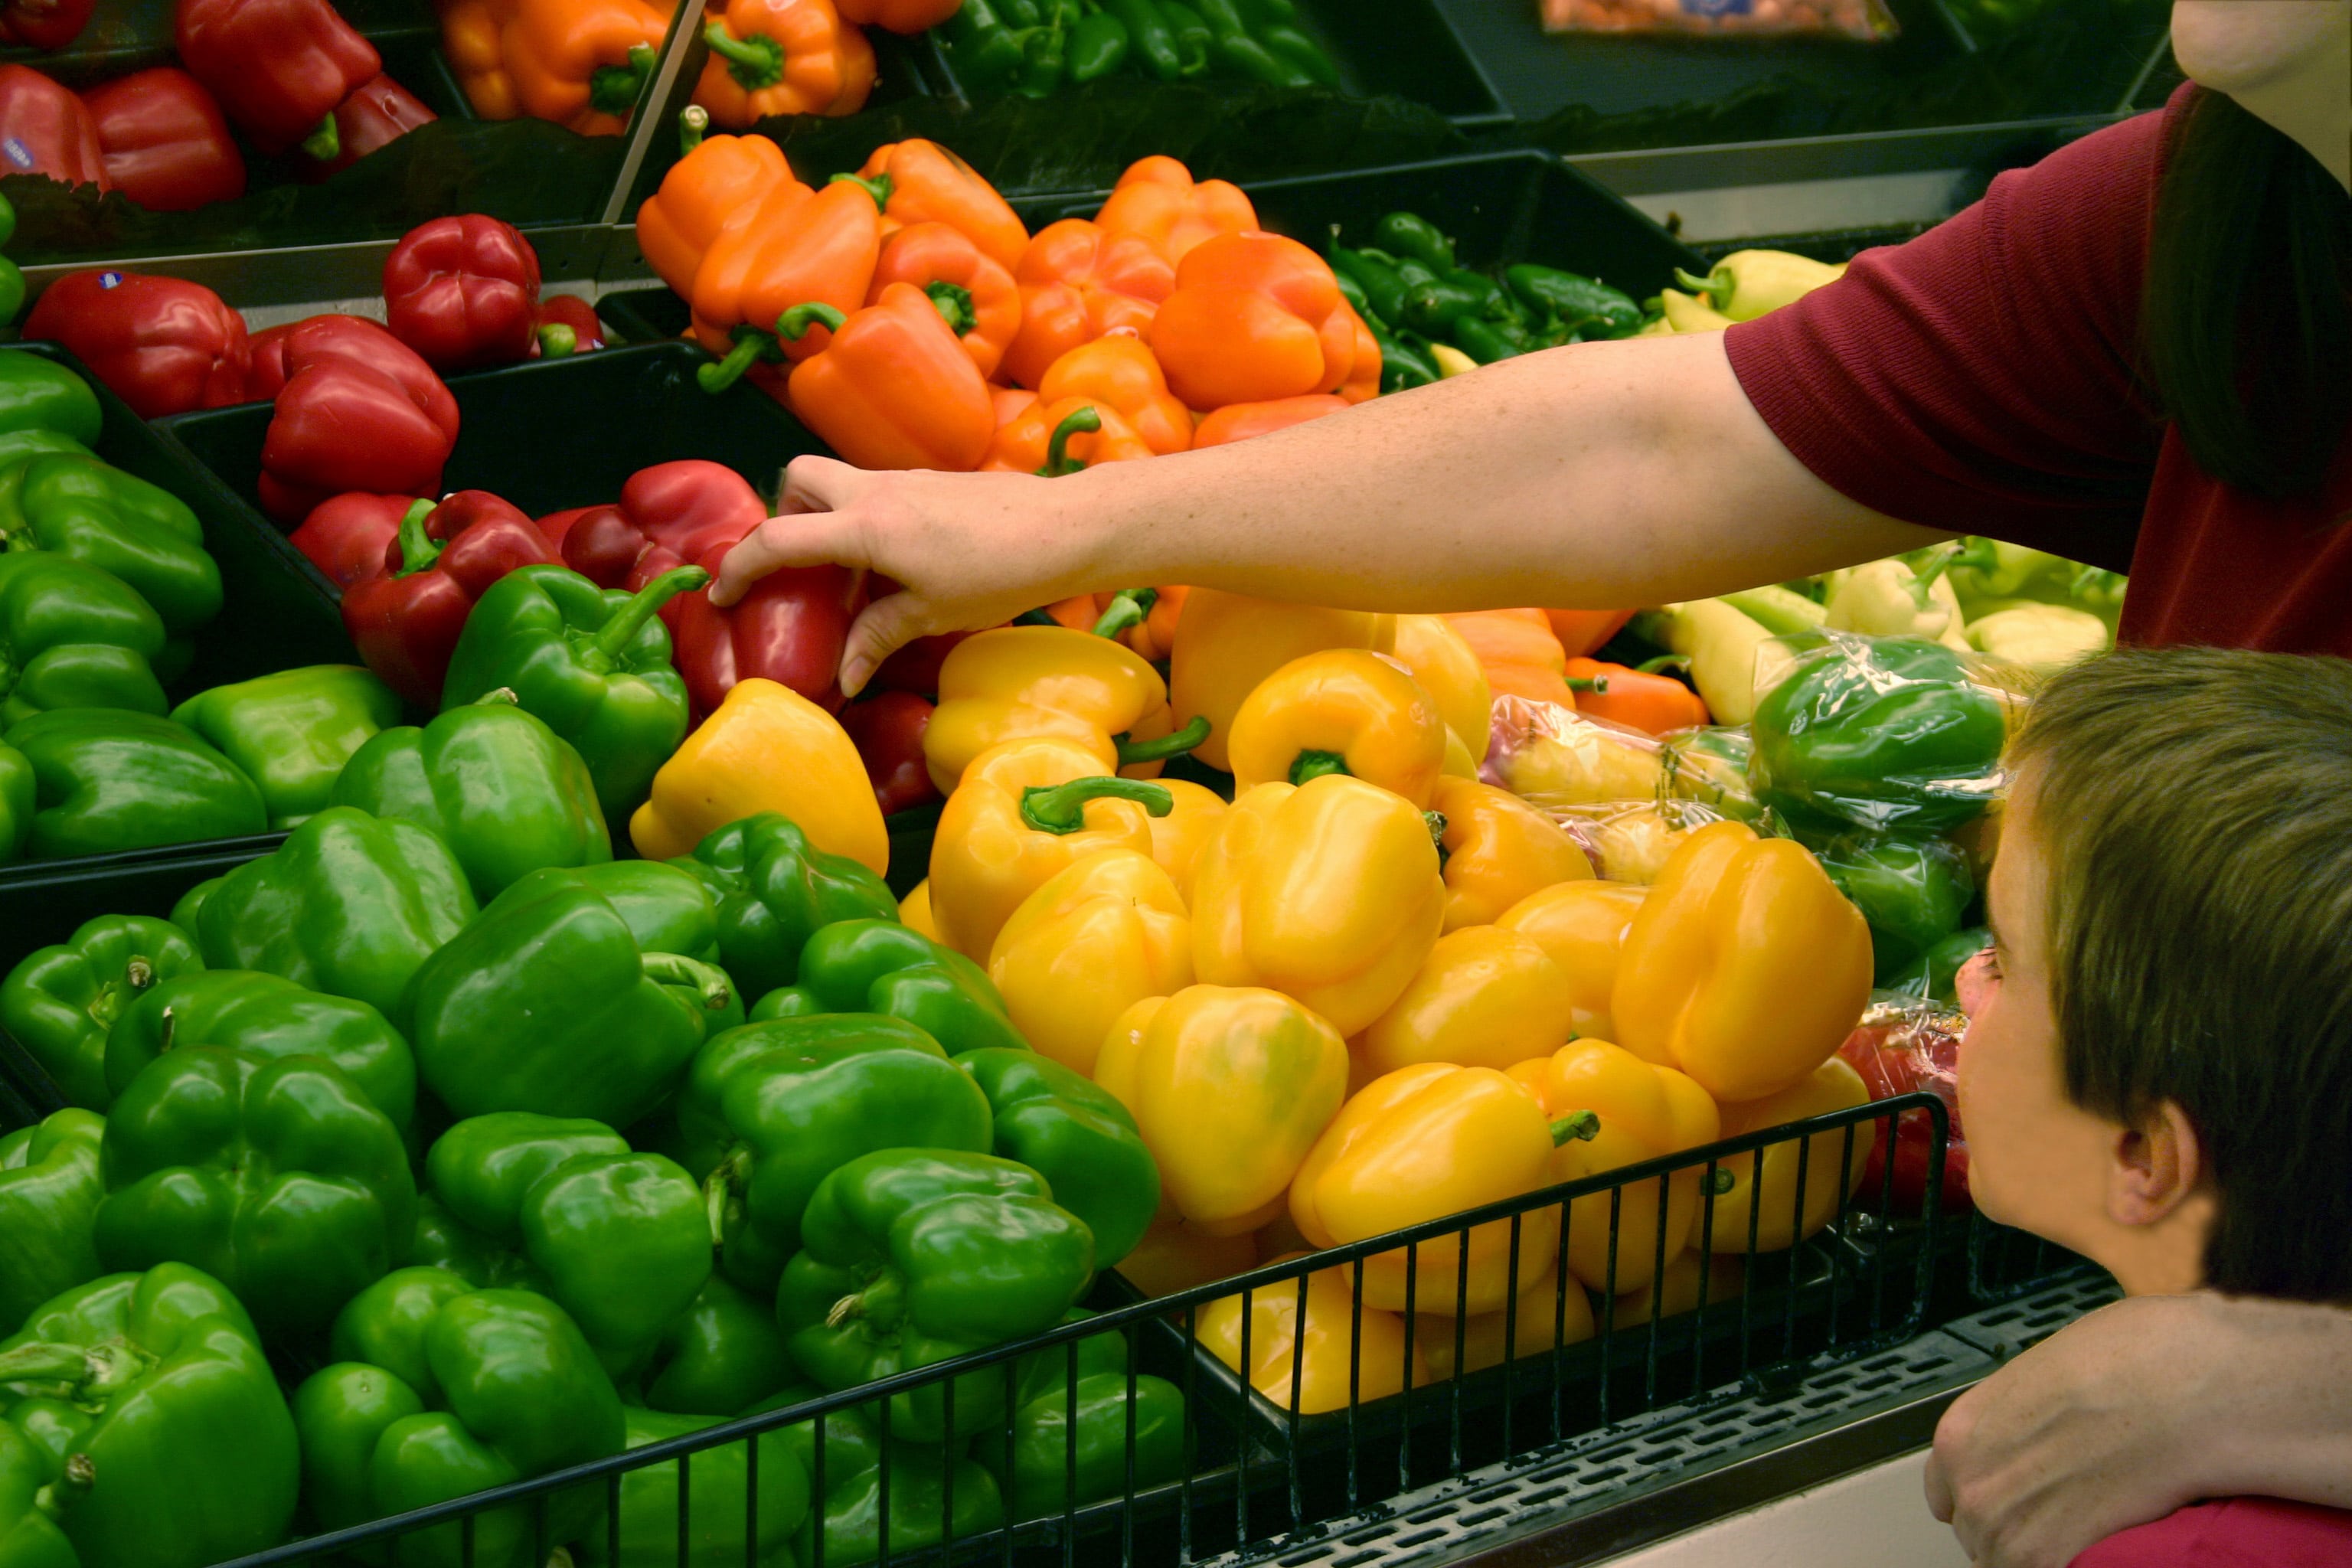 Picking bell peppers from the shelf at the grocery store